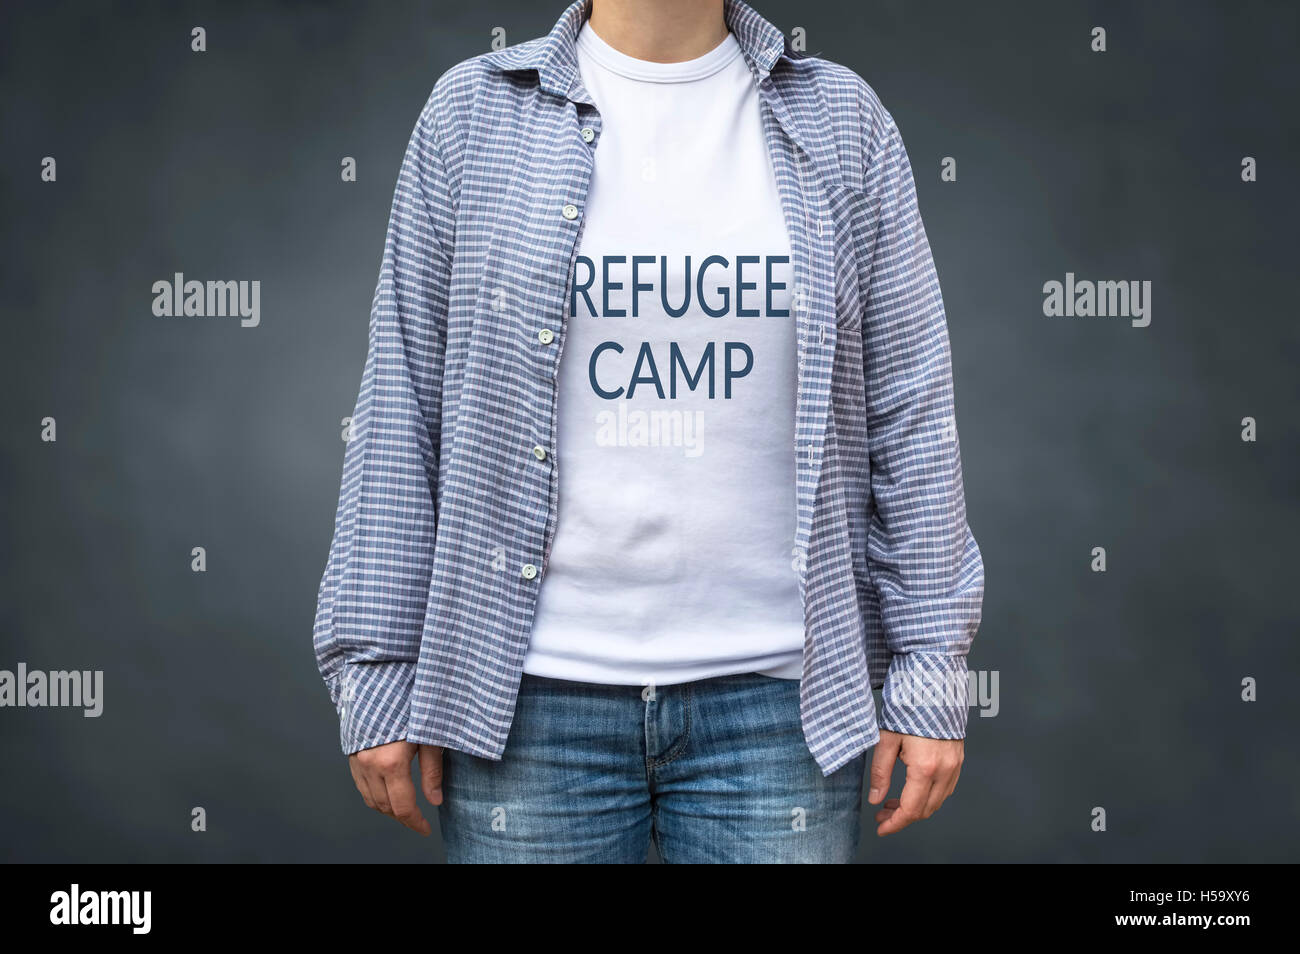 Refugee camp print on t-shirt. Political message. Stock Photo